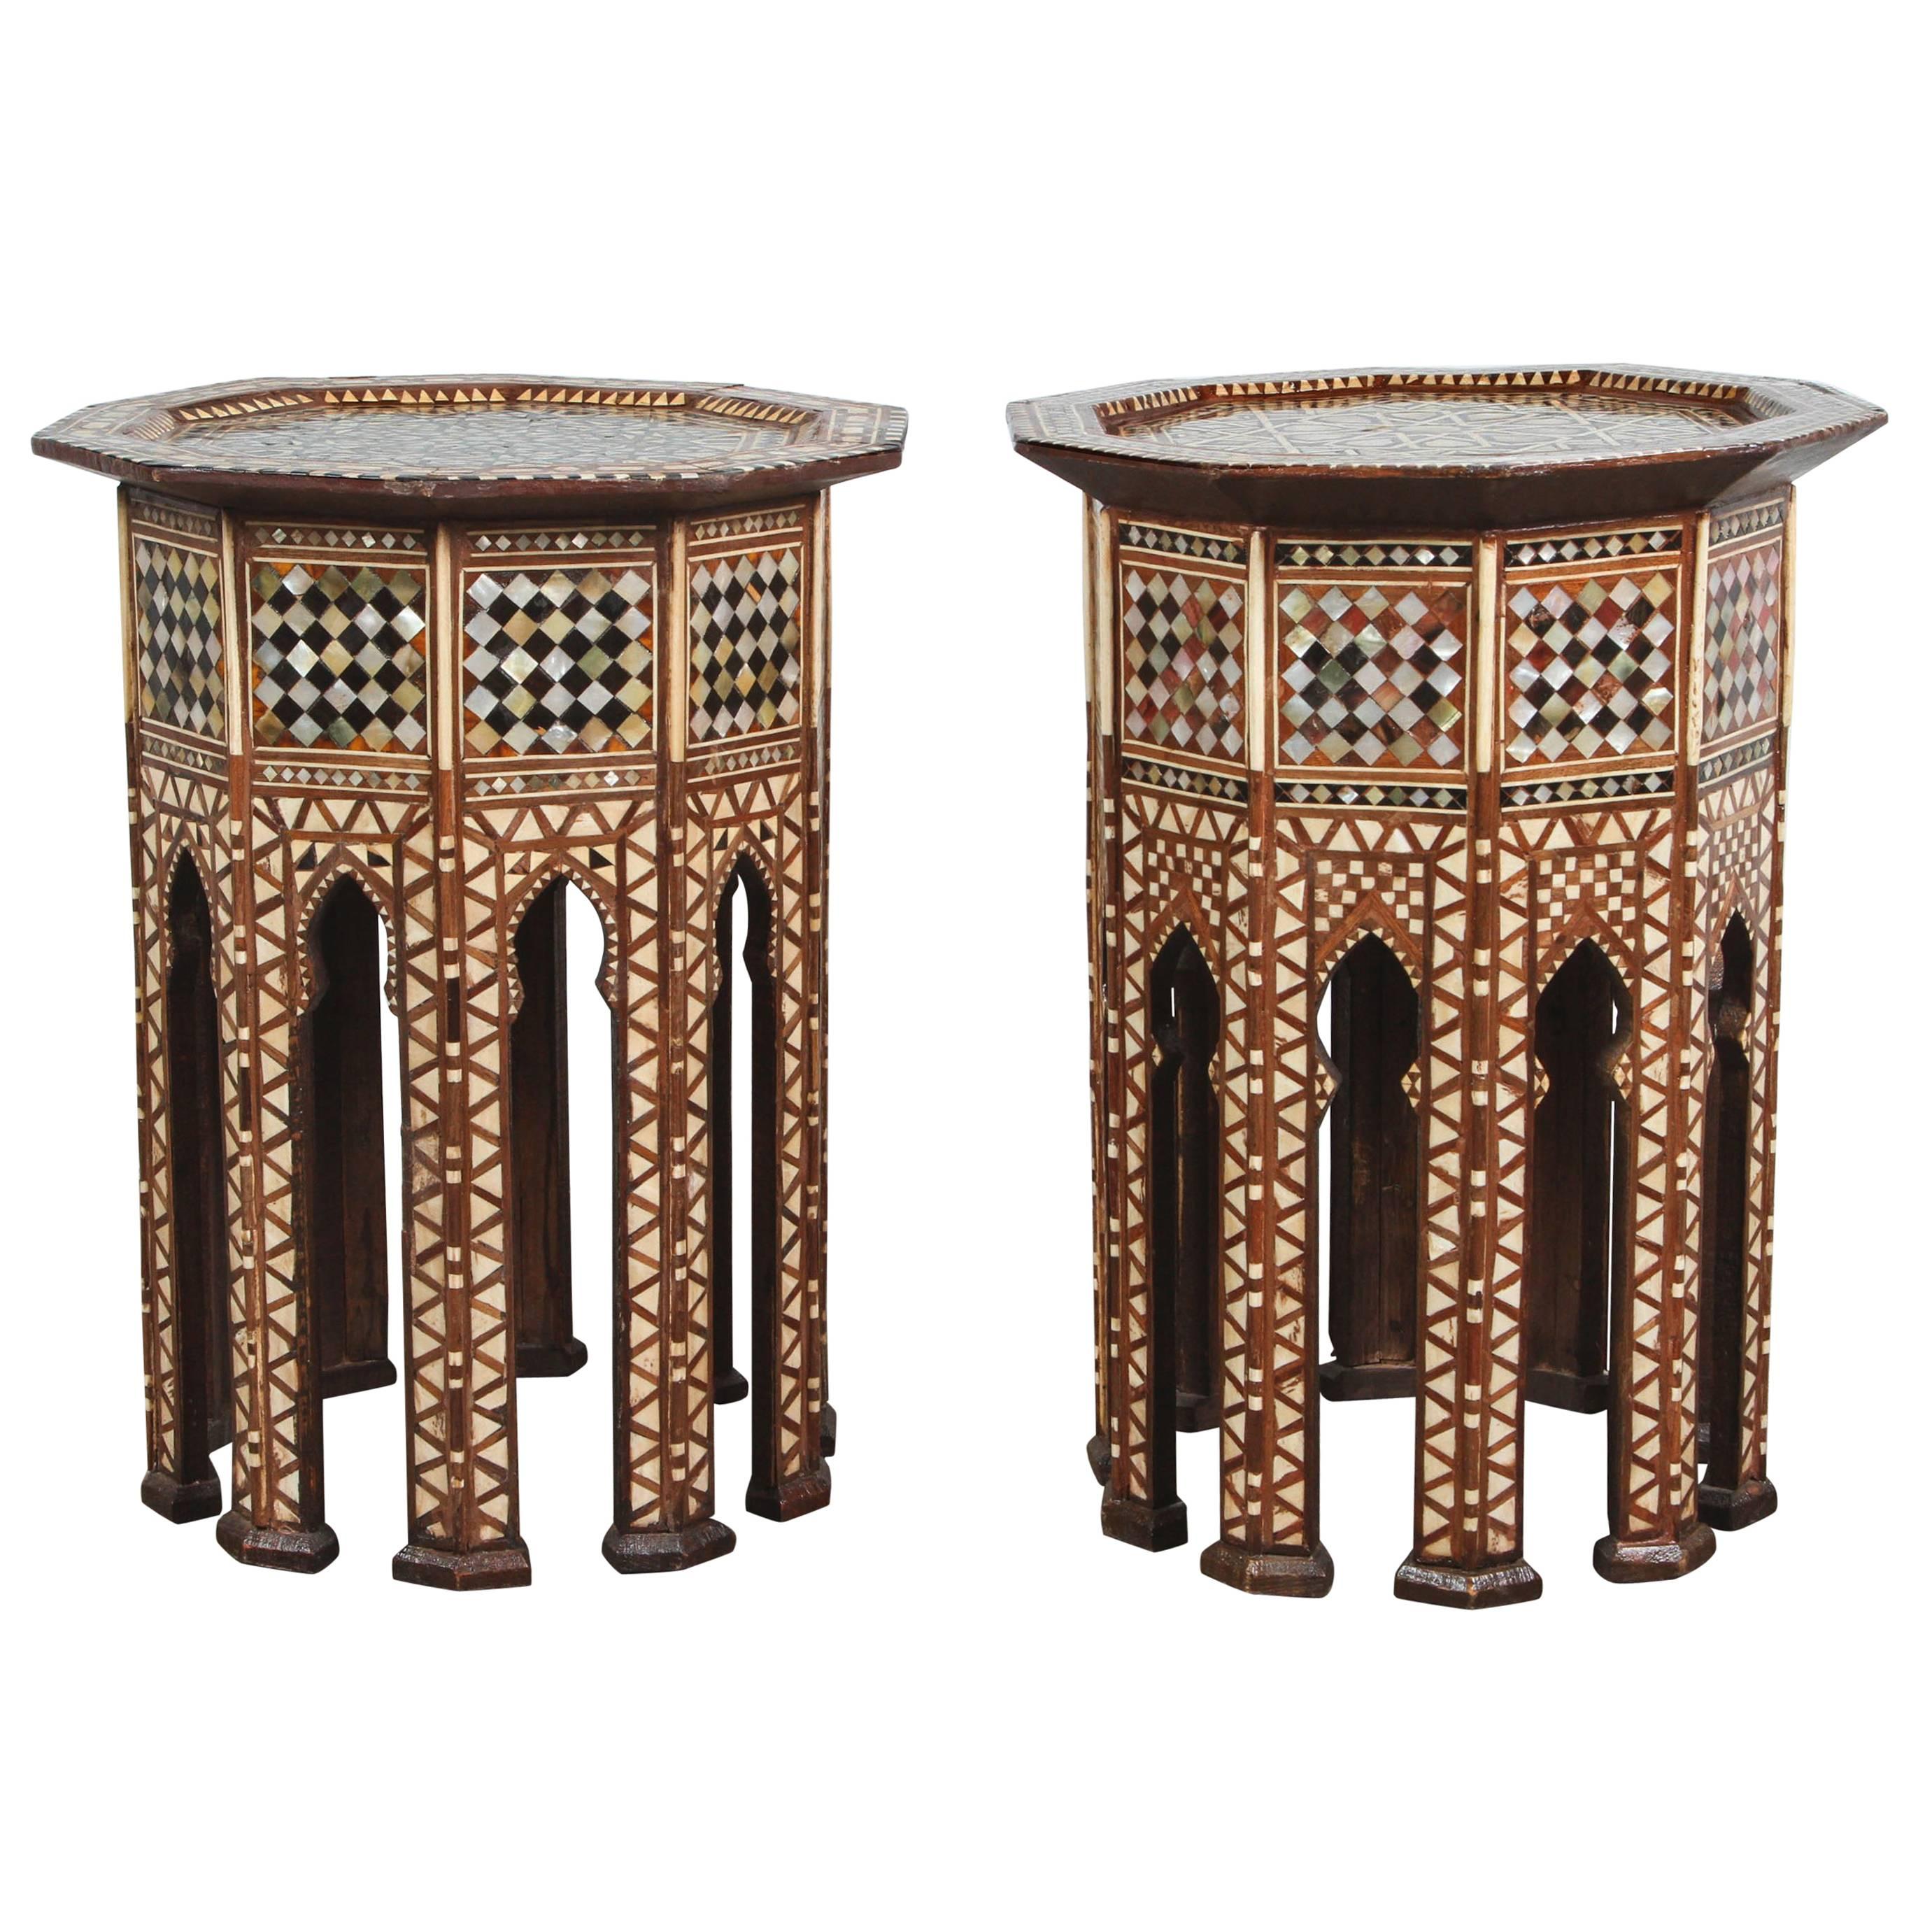 Syrian Octagonal tables Inlaid with Mother-of-Pearl